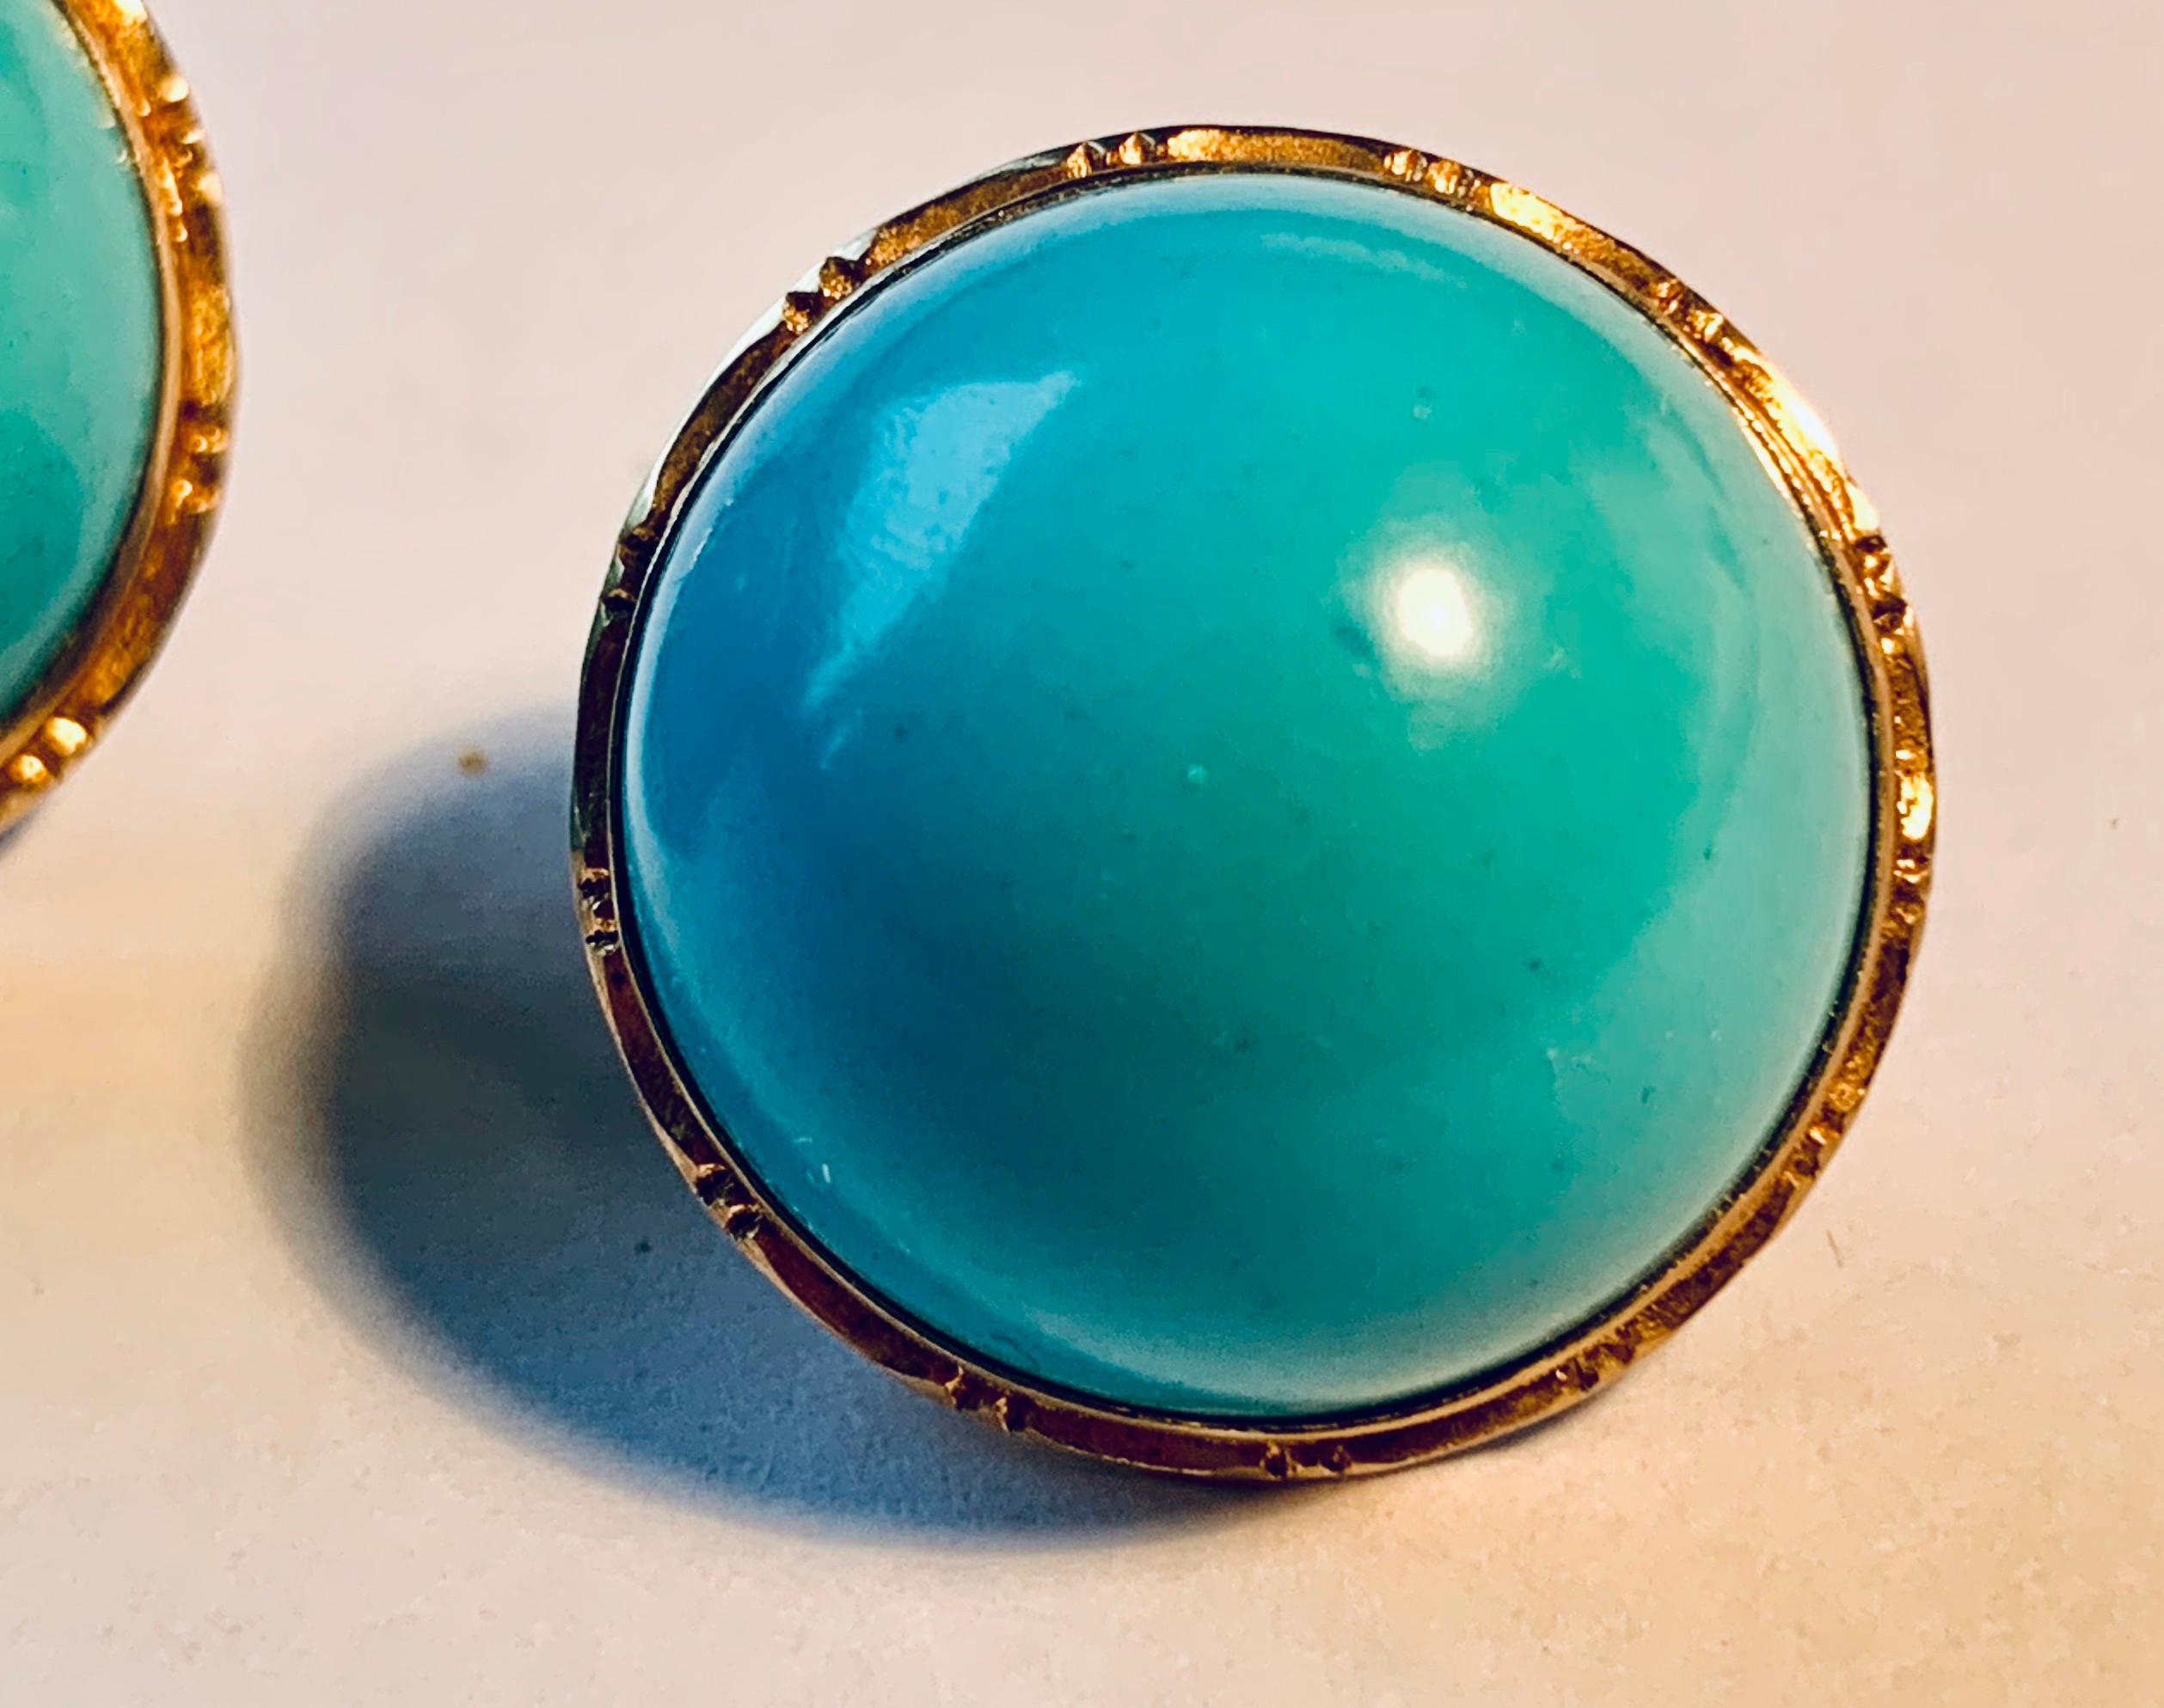 Pair of round 14k yellow gold engraved earrings set with cabochon turquoise stones.  The backs are clips and posts.  The posts can be removed for non pierced wearers.  The are marked 14k and 585.
